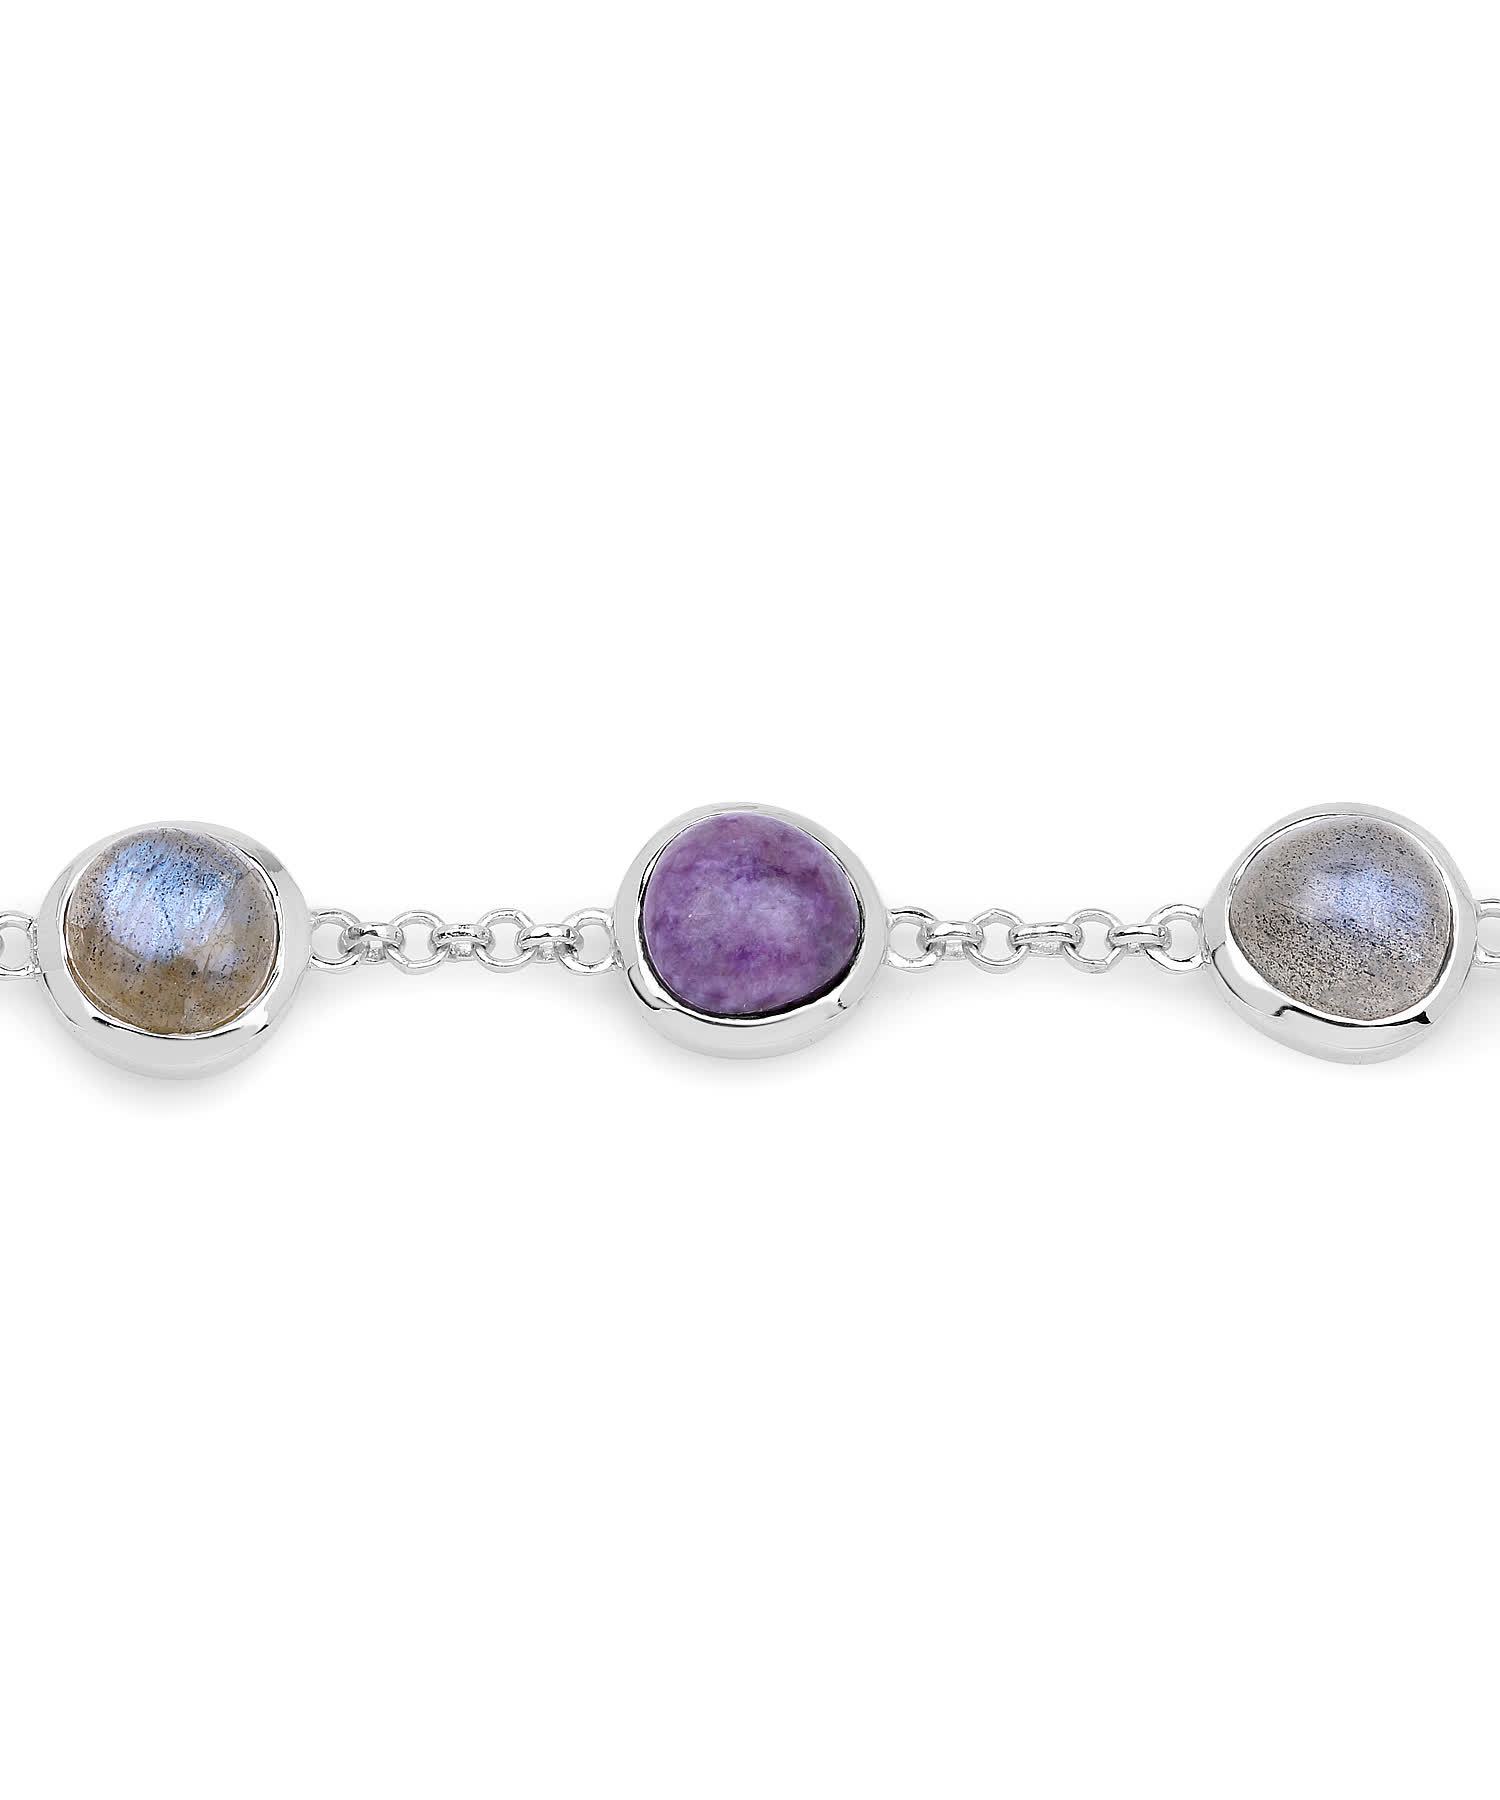 11.00ctw Natural Charolite and Labradorite Rhodium Plated 925 Sterling Silver Link Bracelet View 3